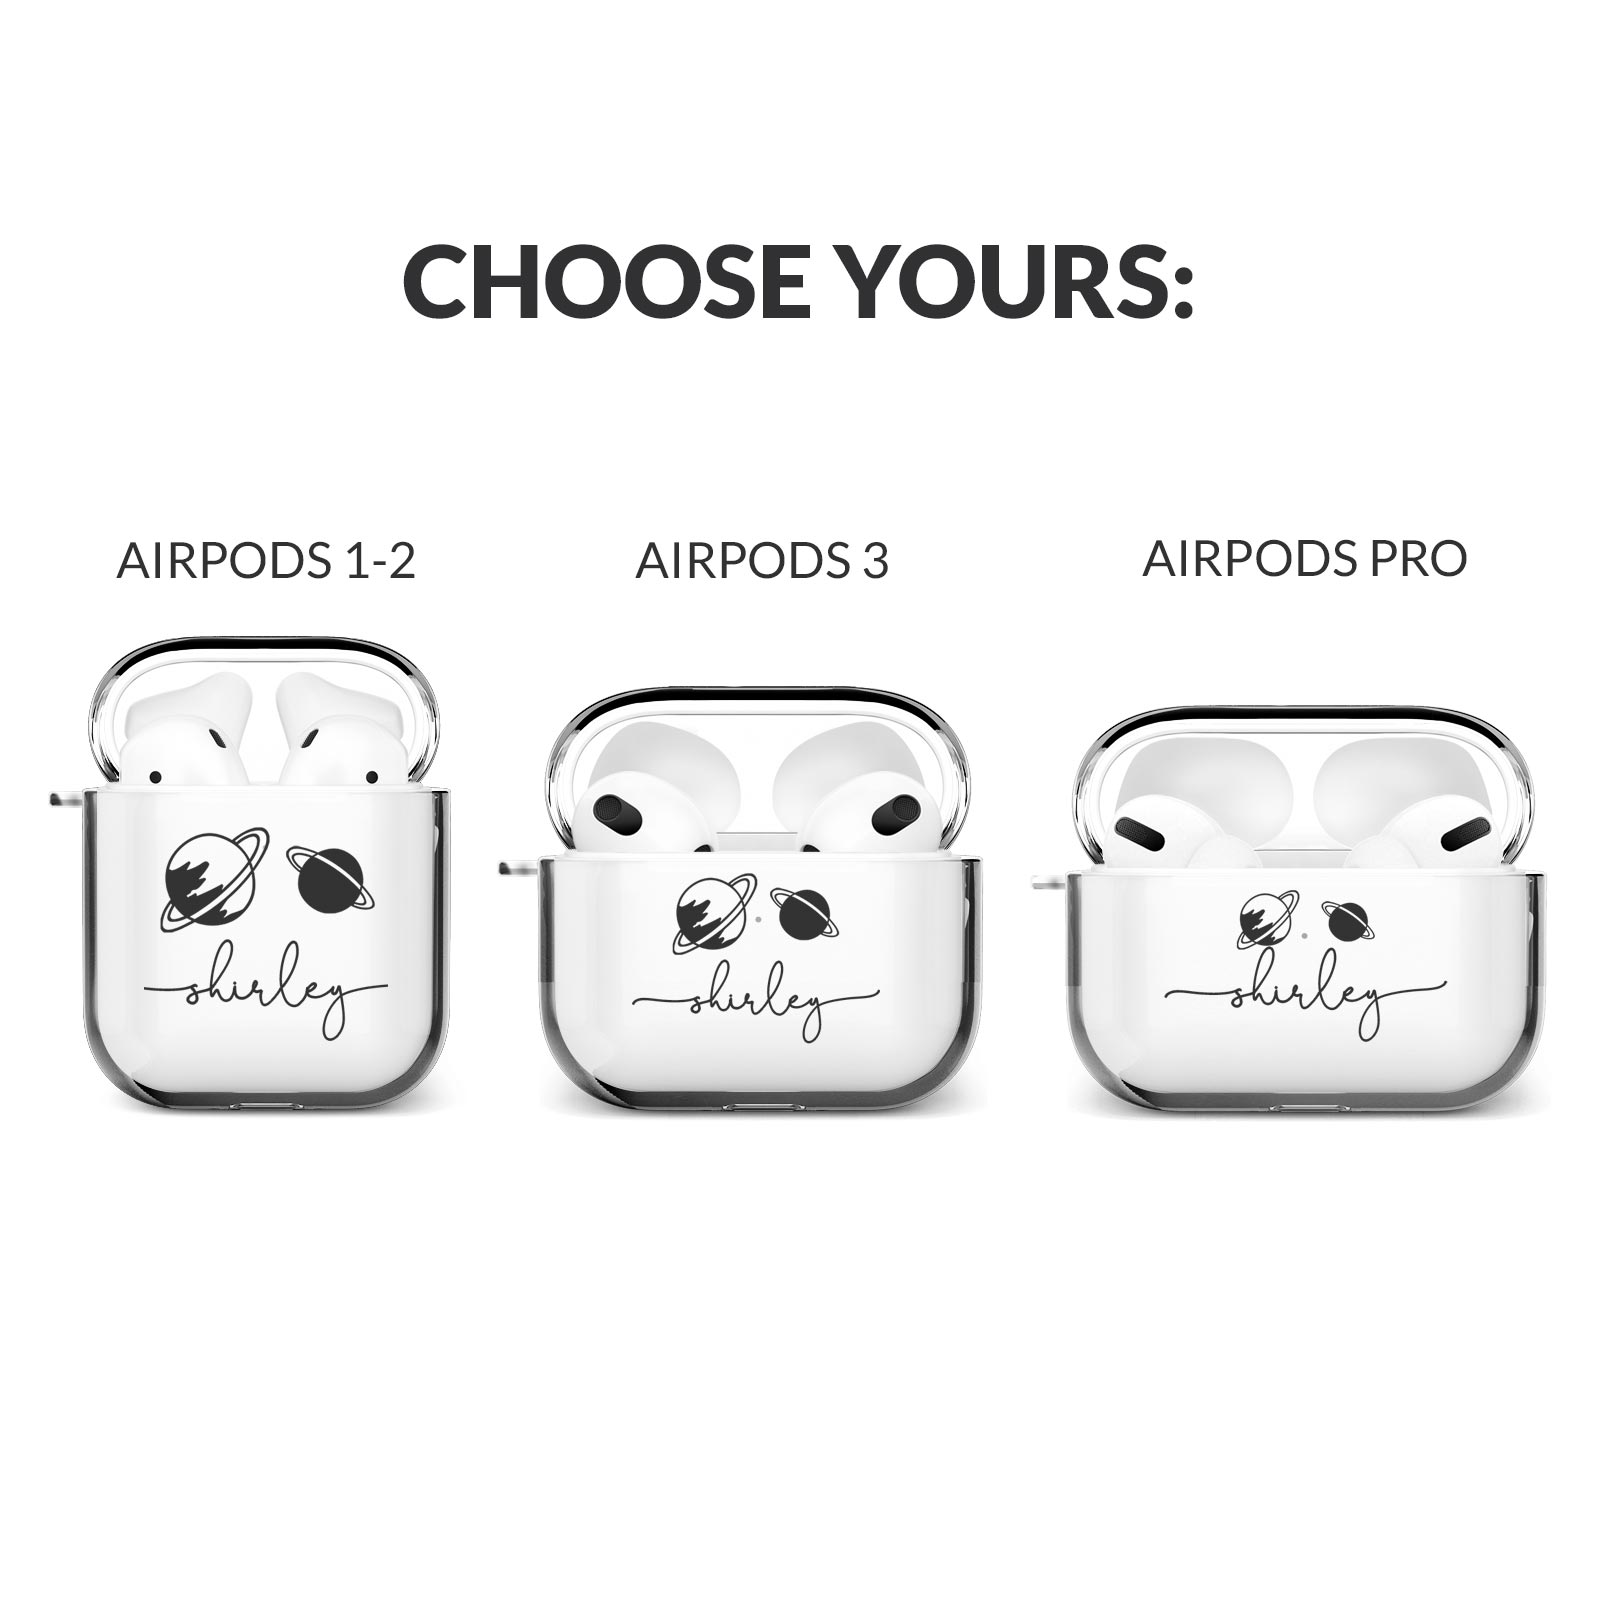 CustomCustom Personalized Protective Cover Compatible with Your Airpod Pro Case Custom Name Black 